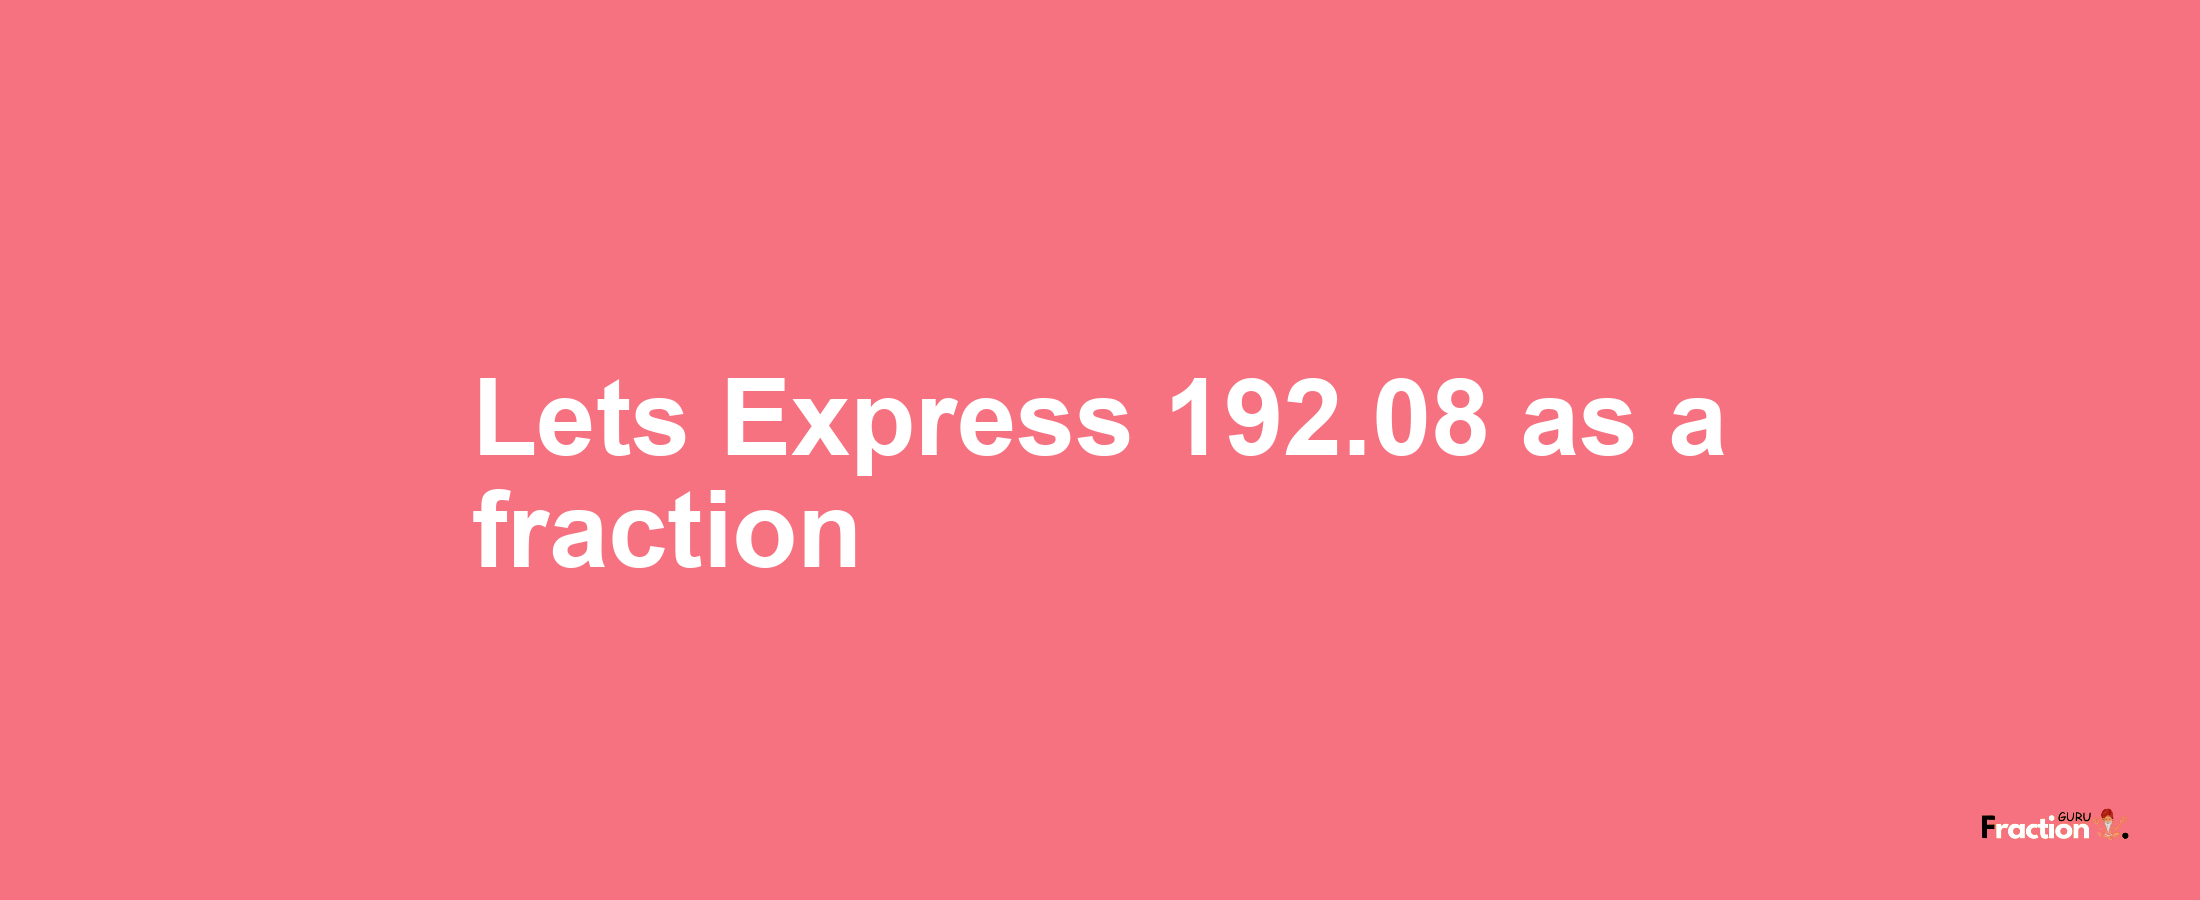 Lets Express 192.08 as afraction